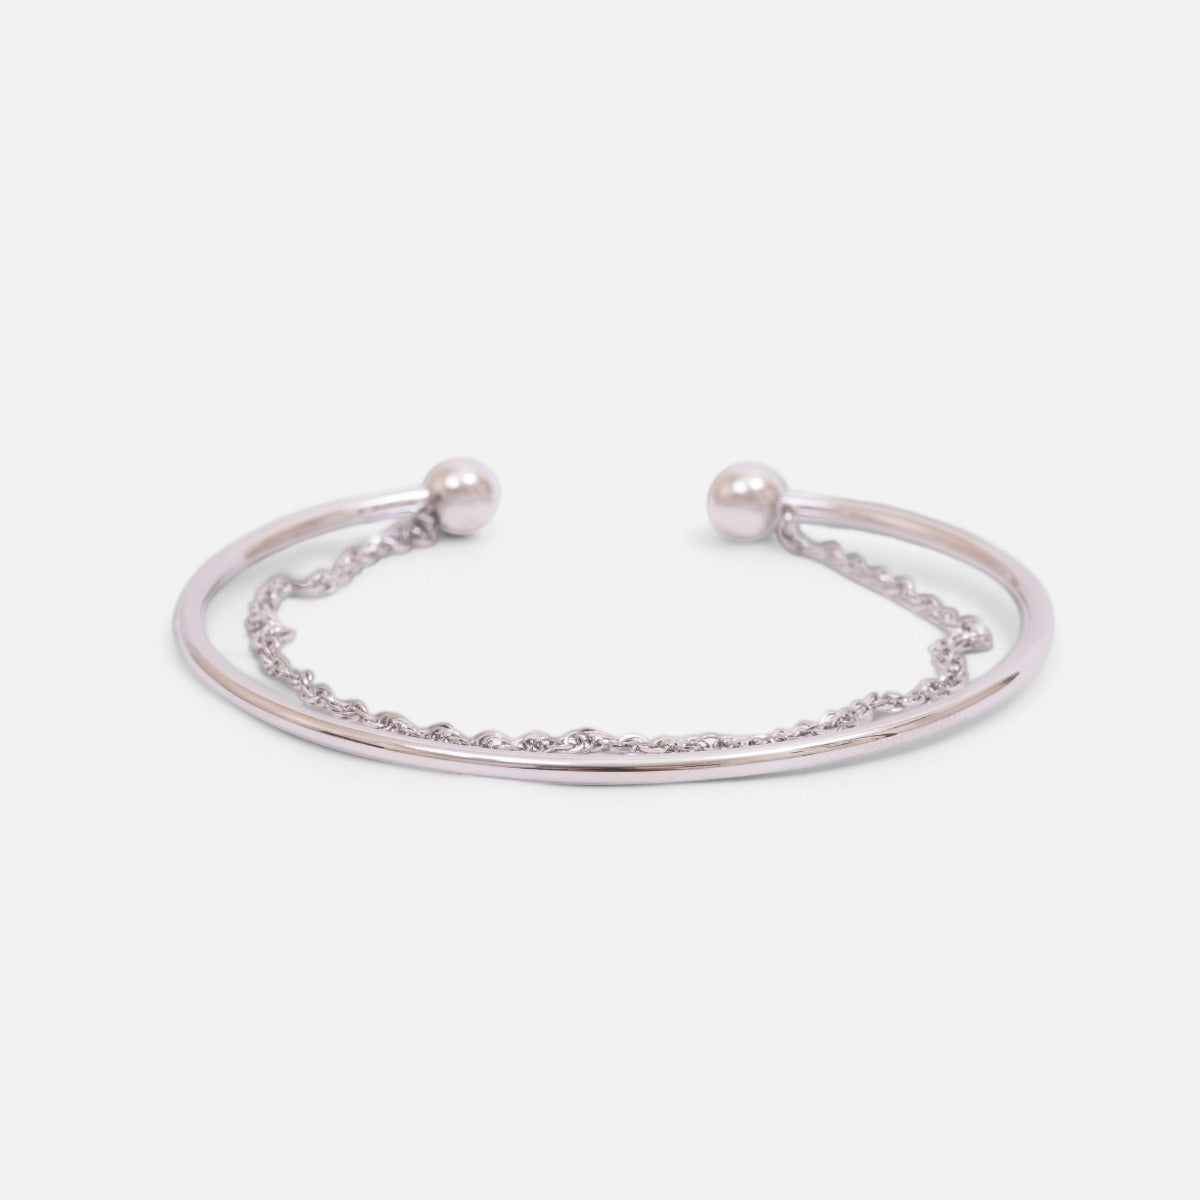 Flexible silver stainless steel bangle bracelet with singapore chain